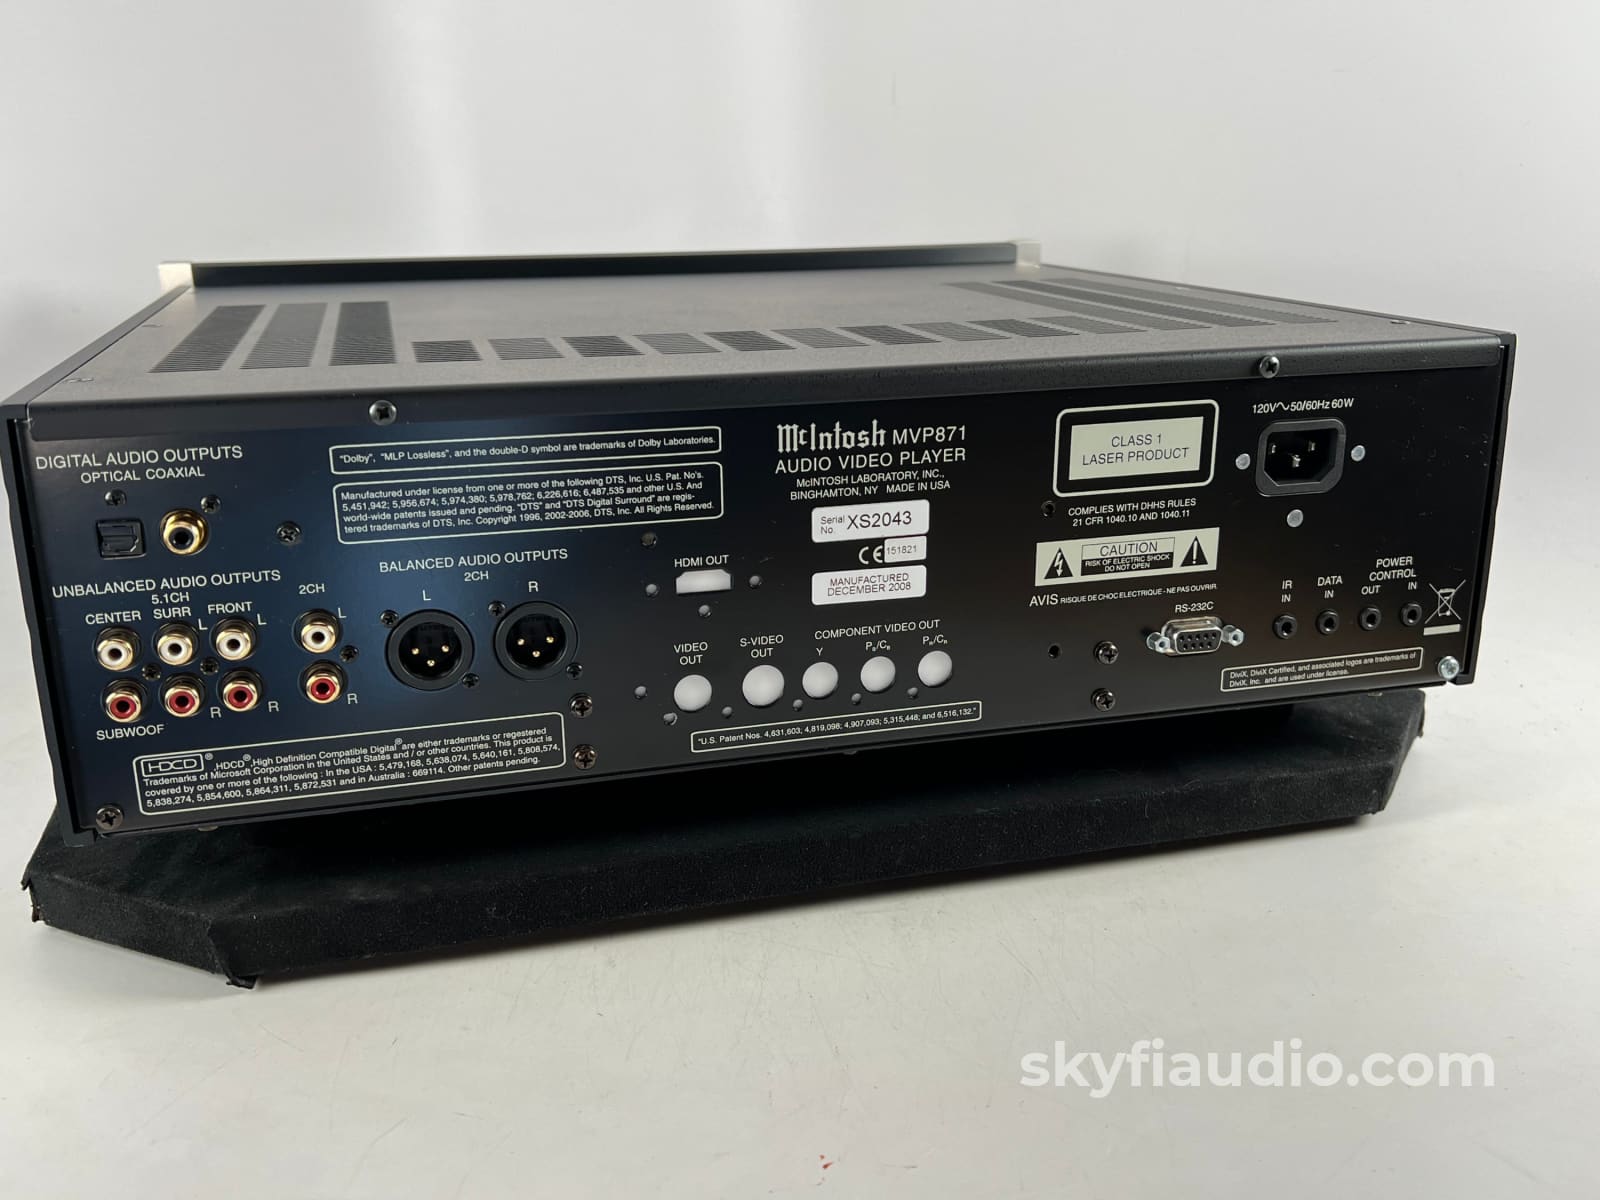 Mcintosh Mvp871 Cd Player - New Laser And Modified For Redbook Cds + Digital